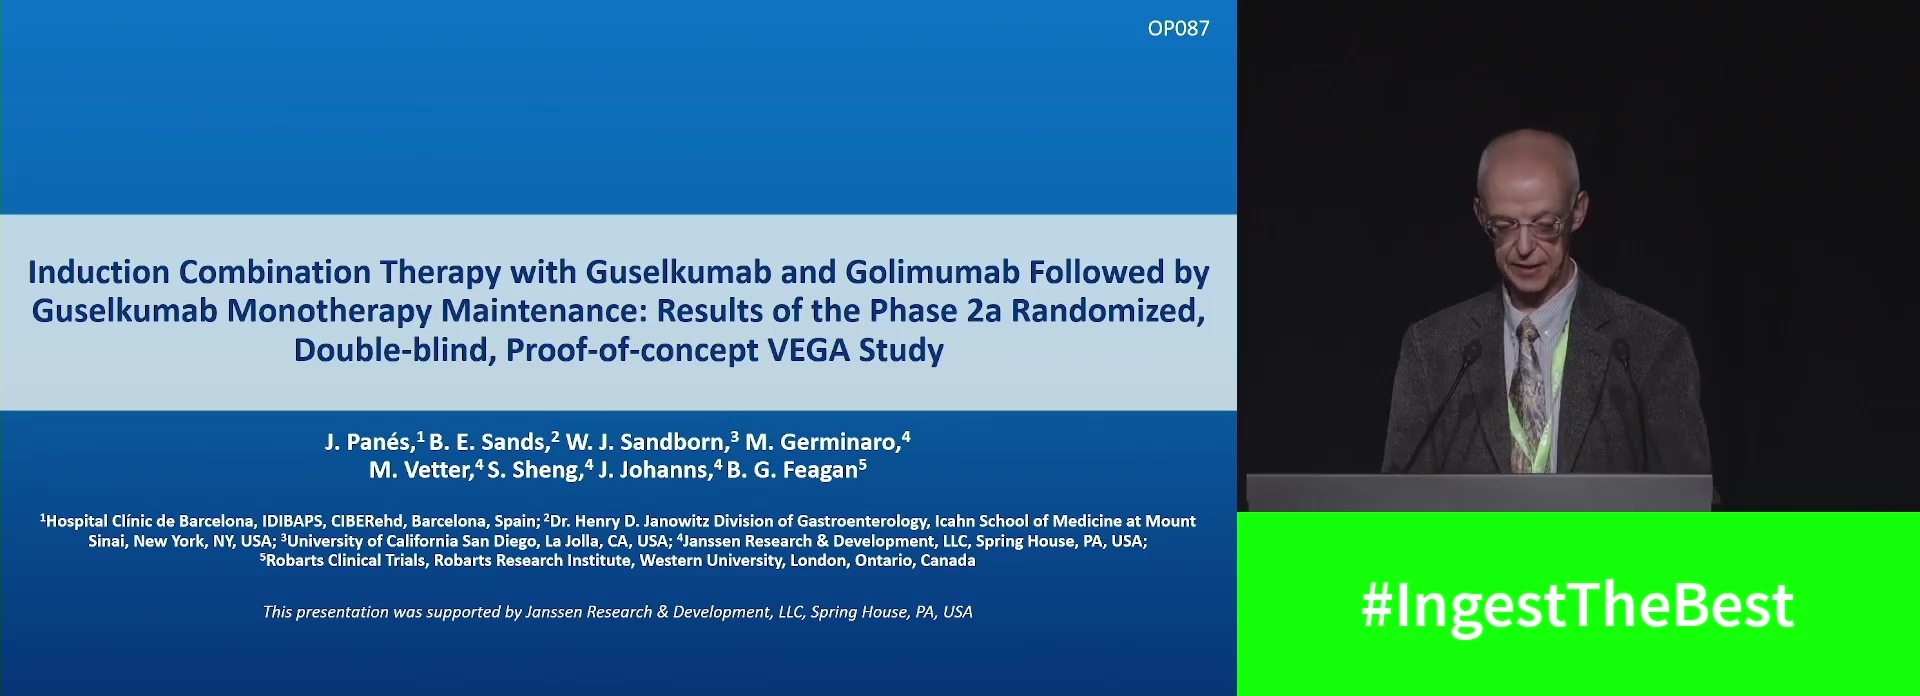 INDUCTION COMBINATION THERAPY WITH GUSELKUMAB AND GOLIMUMAB FOLLOWED BY GUSELKUMAB MONOTHERAPY MAINTENANCE: RESULTS OF THE PHASE 2A, RANDOMIZED, DOUBLE-BLIND, PROOF-OF-CONCEPT VEGA STUDY